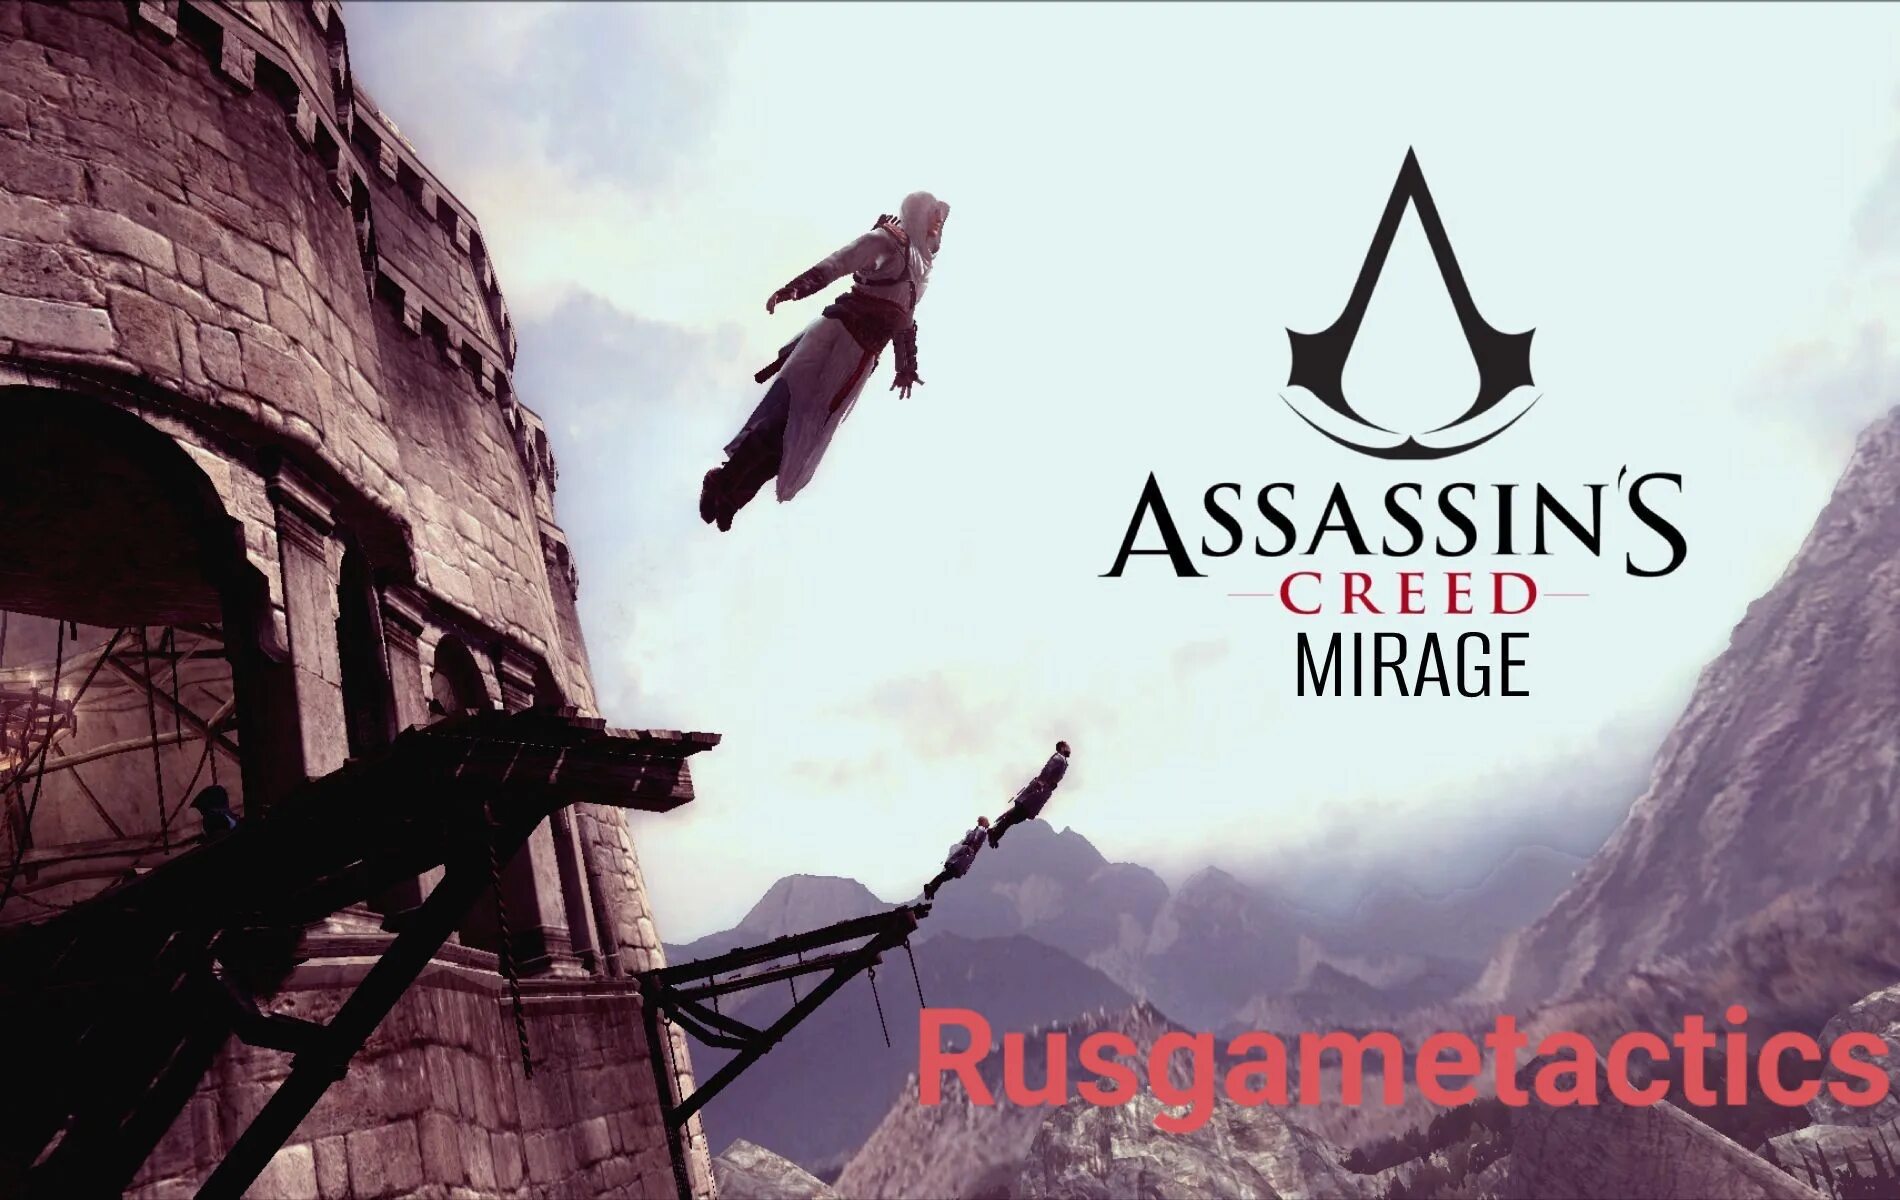 Assassin’s Creed Mirage. Assassins Creed Mirage 2023. Ассасин Крид Мираж геймплей. Басим ассасин Крид Мираж.